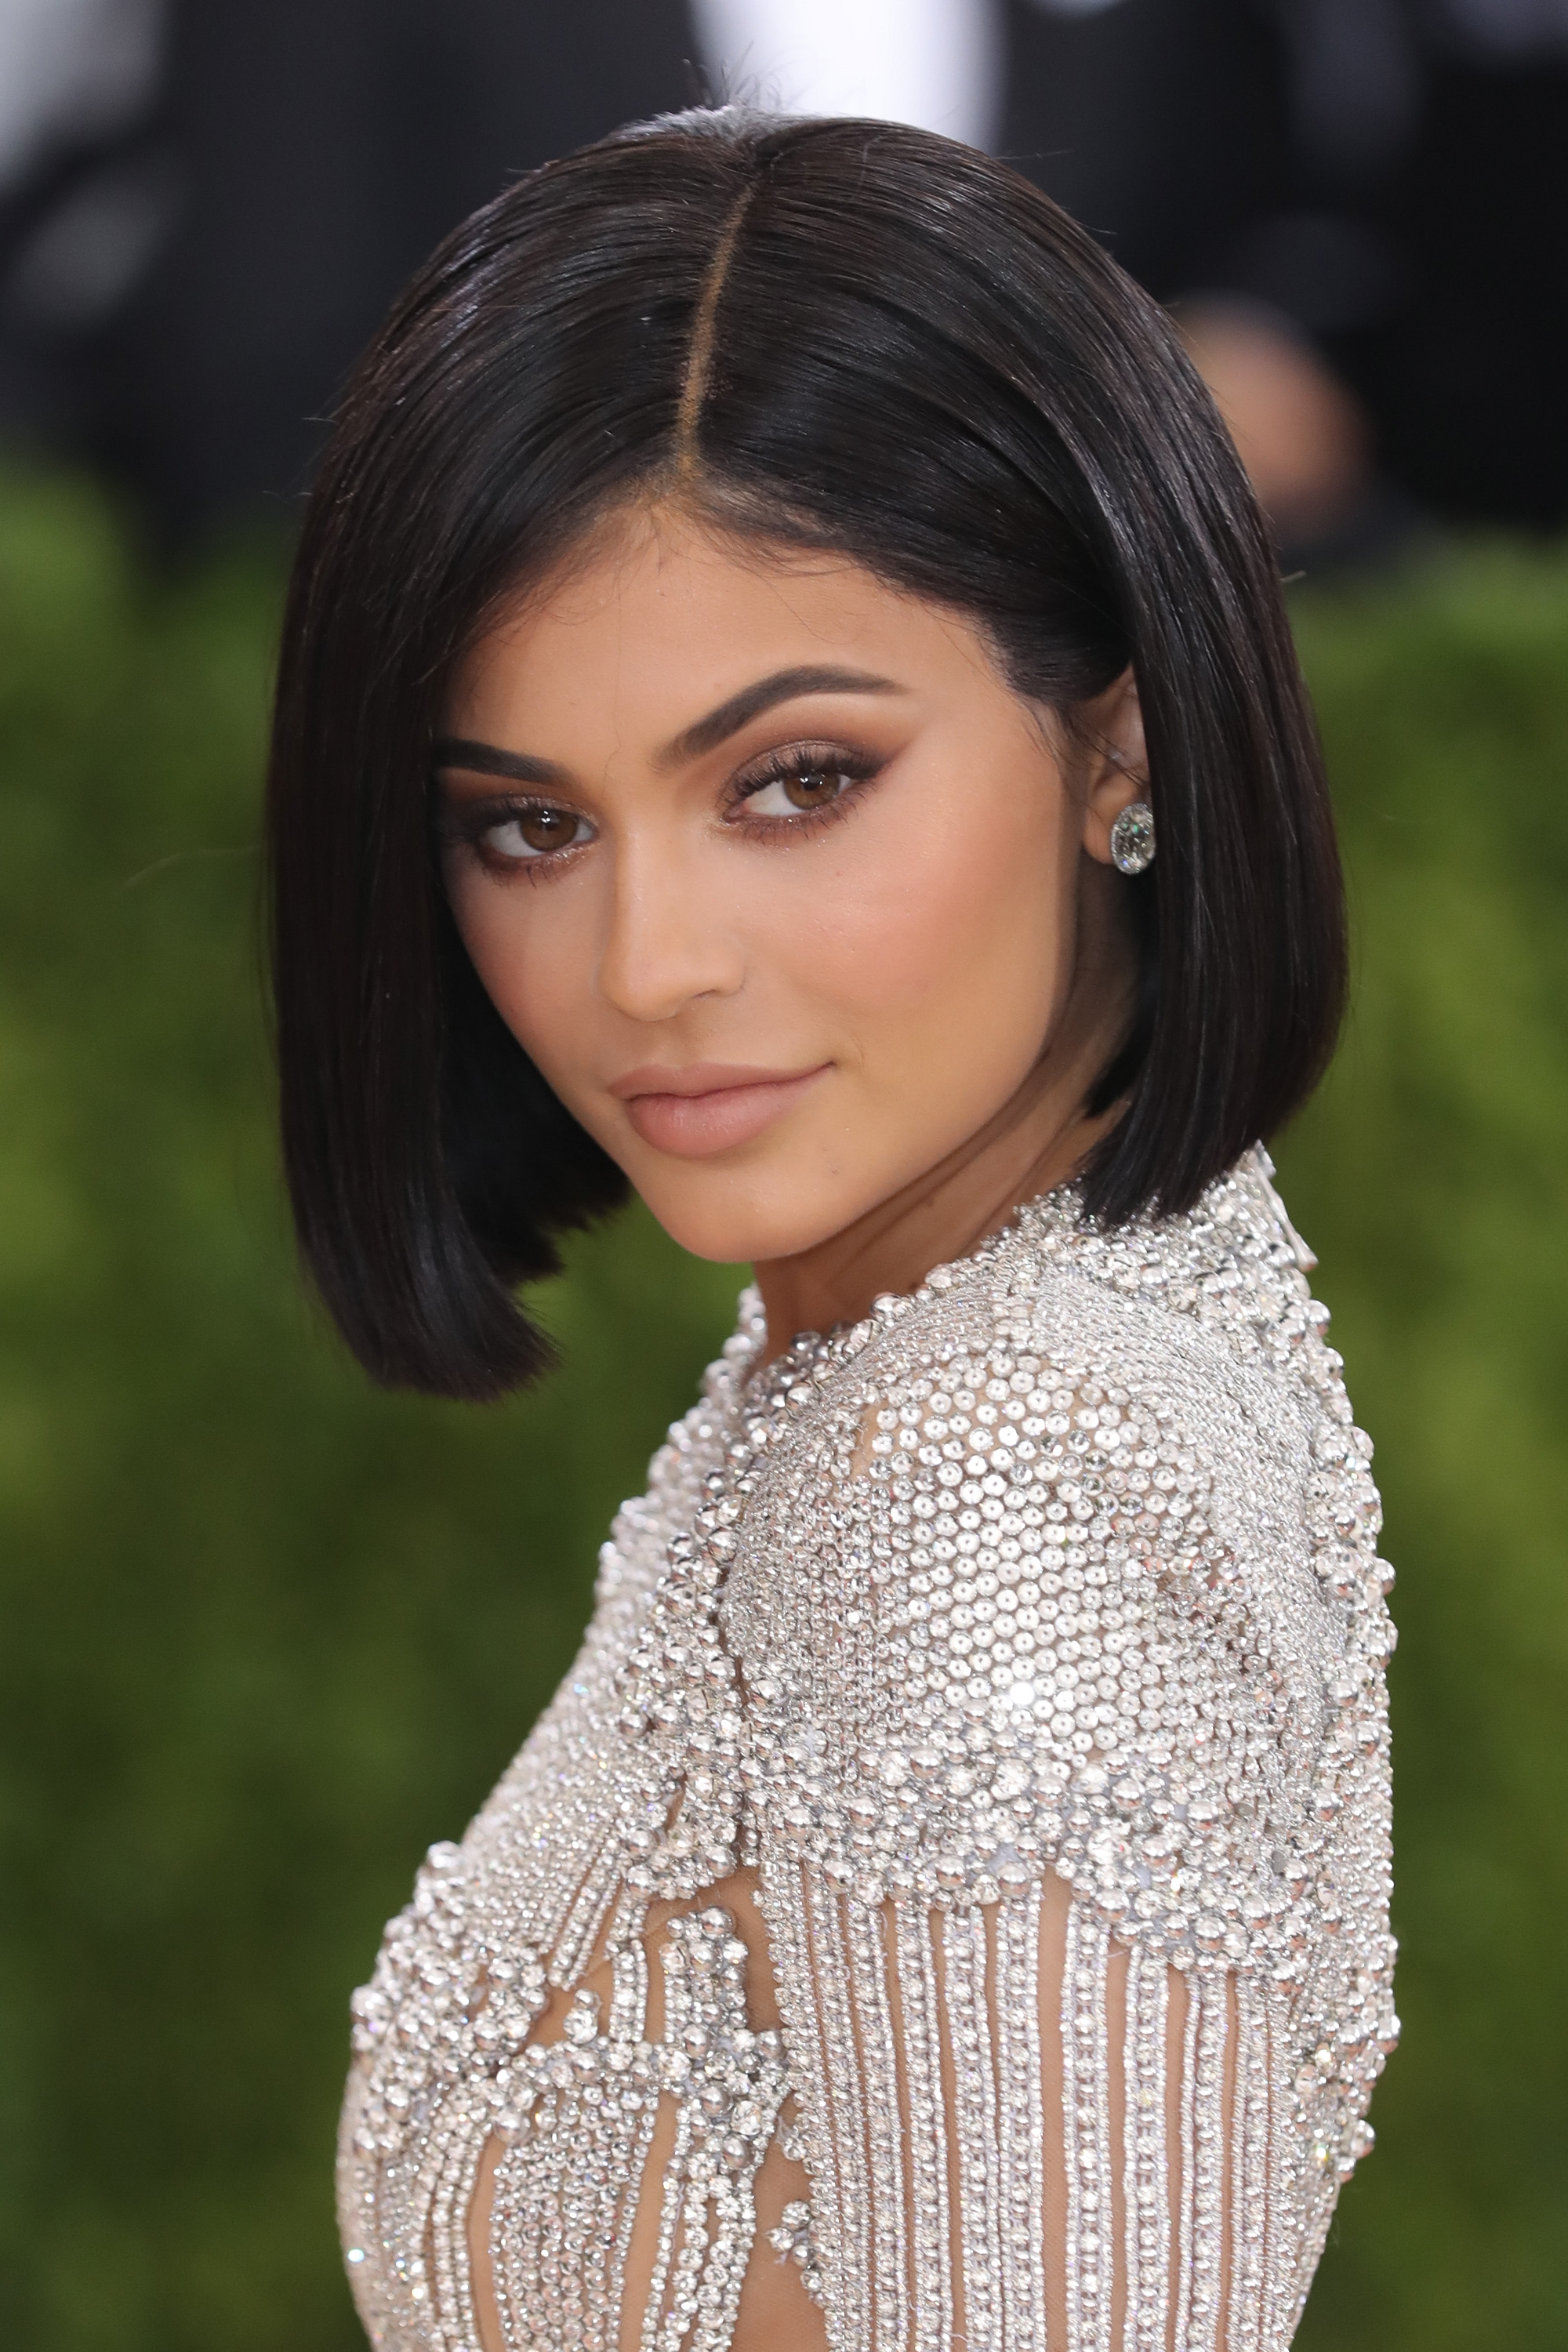 The One Beautyblender Hack Kylie Jenner Swears By Comes From A